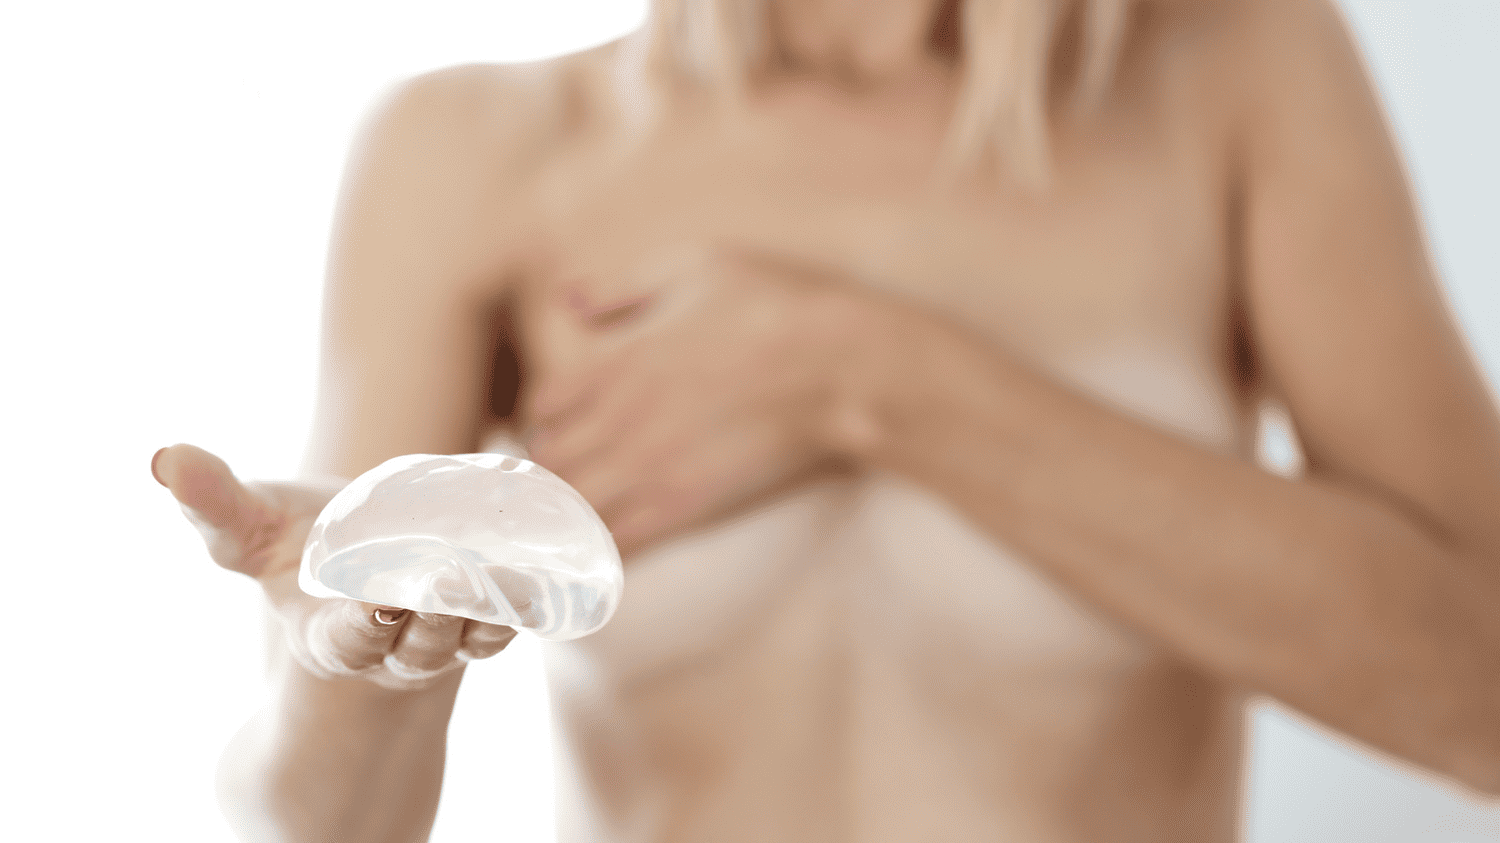 Breast Reconstruction after Mastectomy: 10 Key Considerations